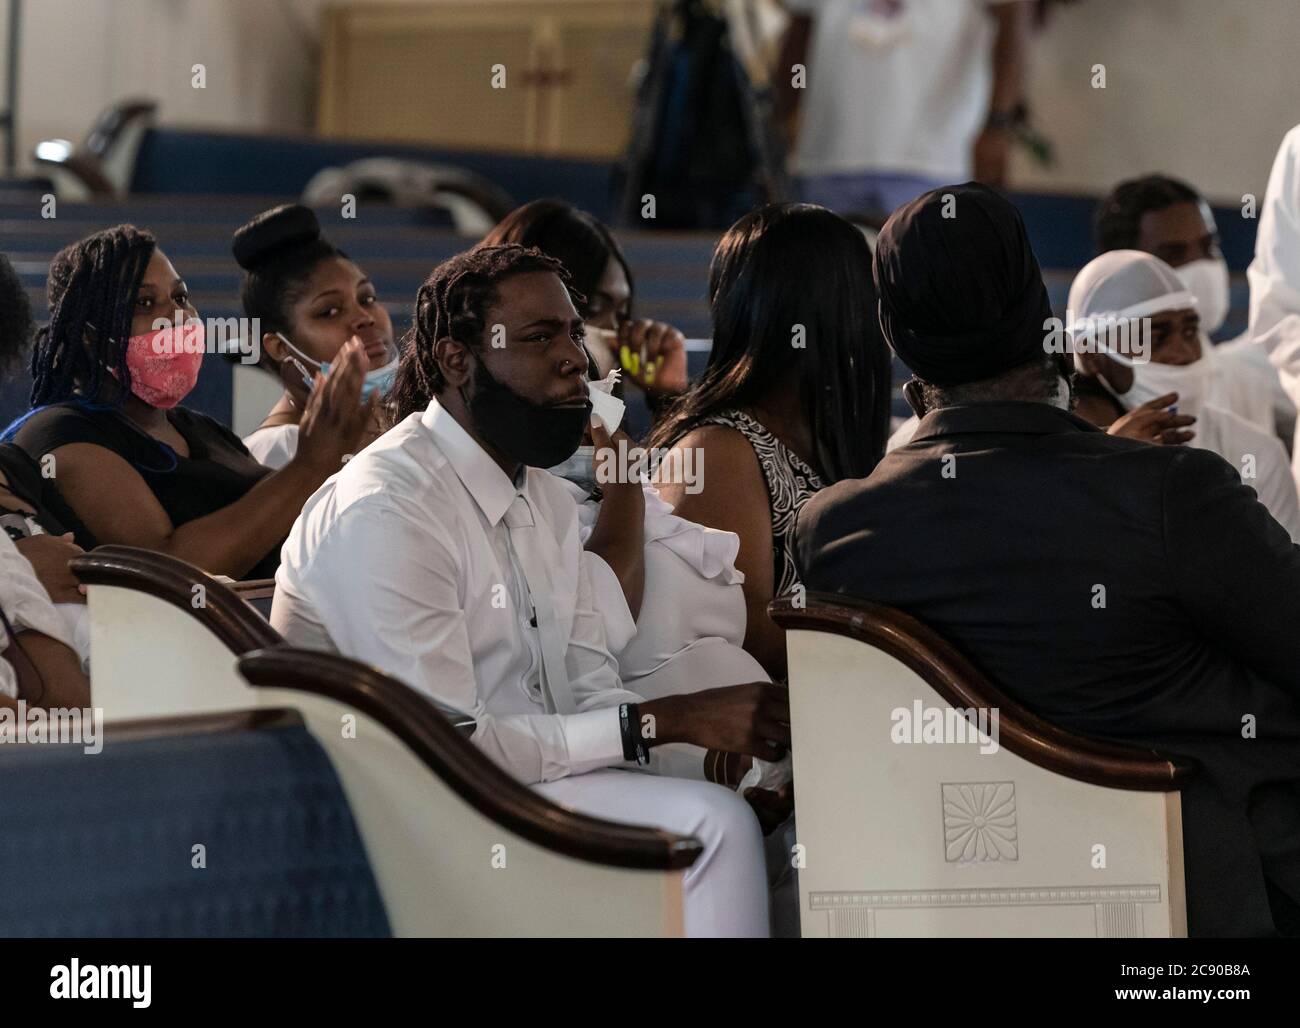 New York, NY - July 27, 2020: Father Davell Gardner Sr and mother Felicia Gordon seen at the funeral for 1-year-old boy killed by bullet at Pleasant Grove Baptist Church Stock Photo